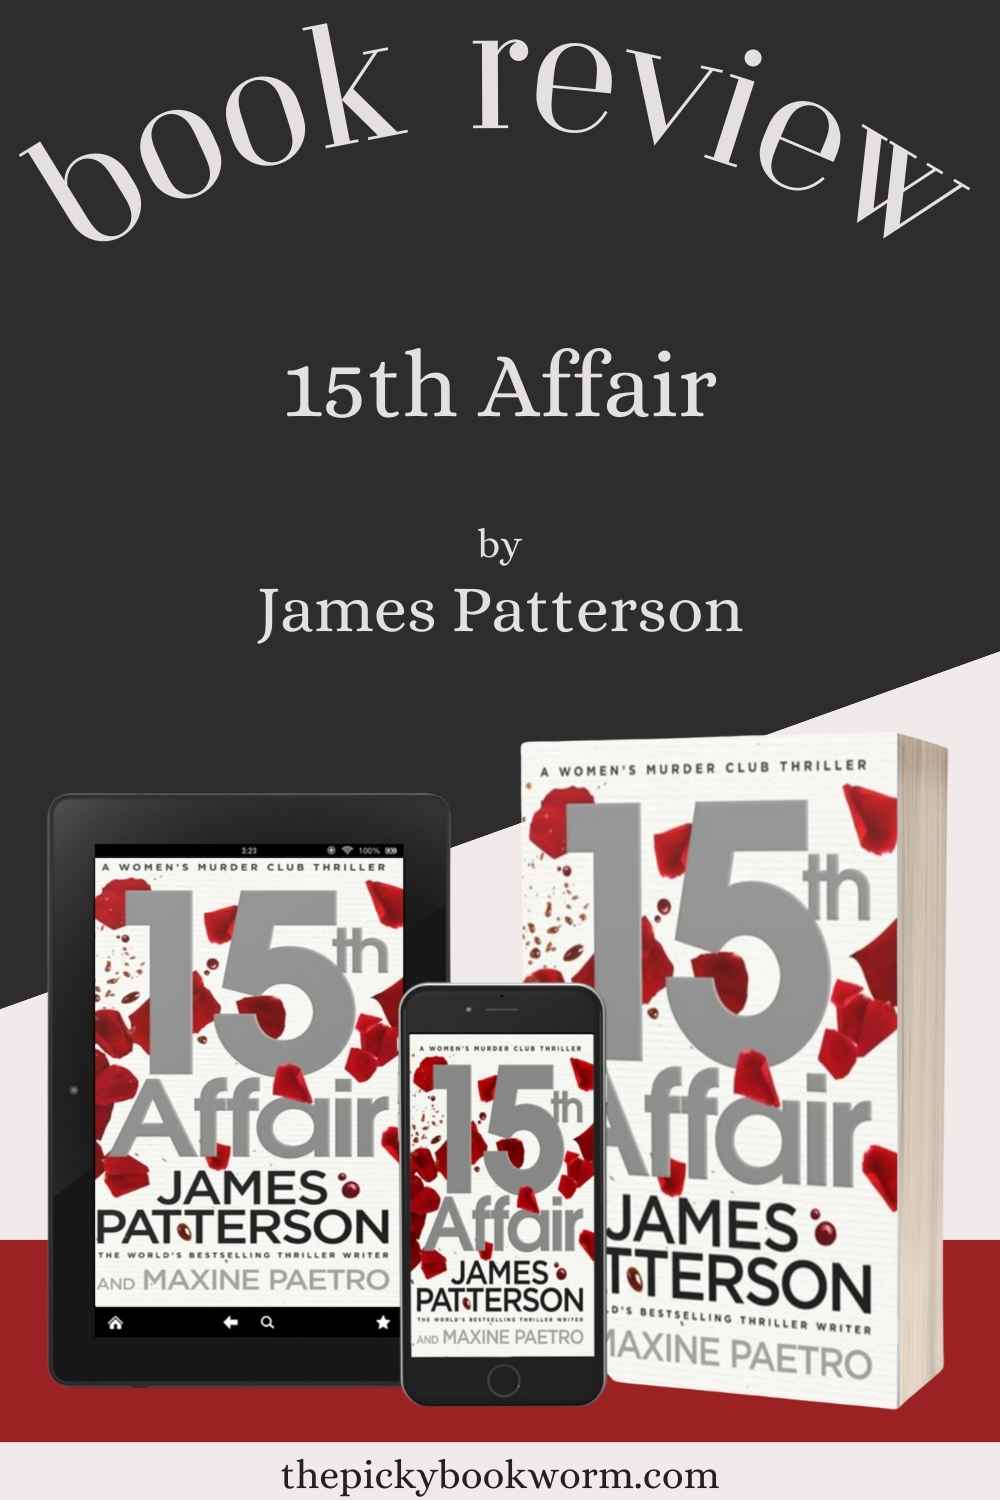 Book Review of 15th Affair by James Patterson on The Picky Bookworm blog. I'm proud of this book review because it was the first one I ever wrote and sparked my love for book blogging.